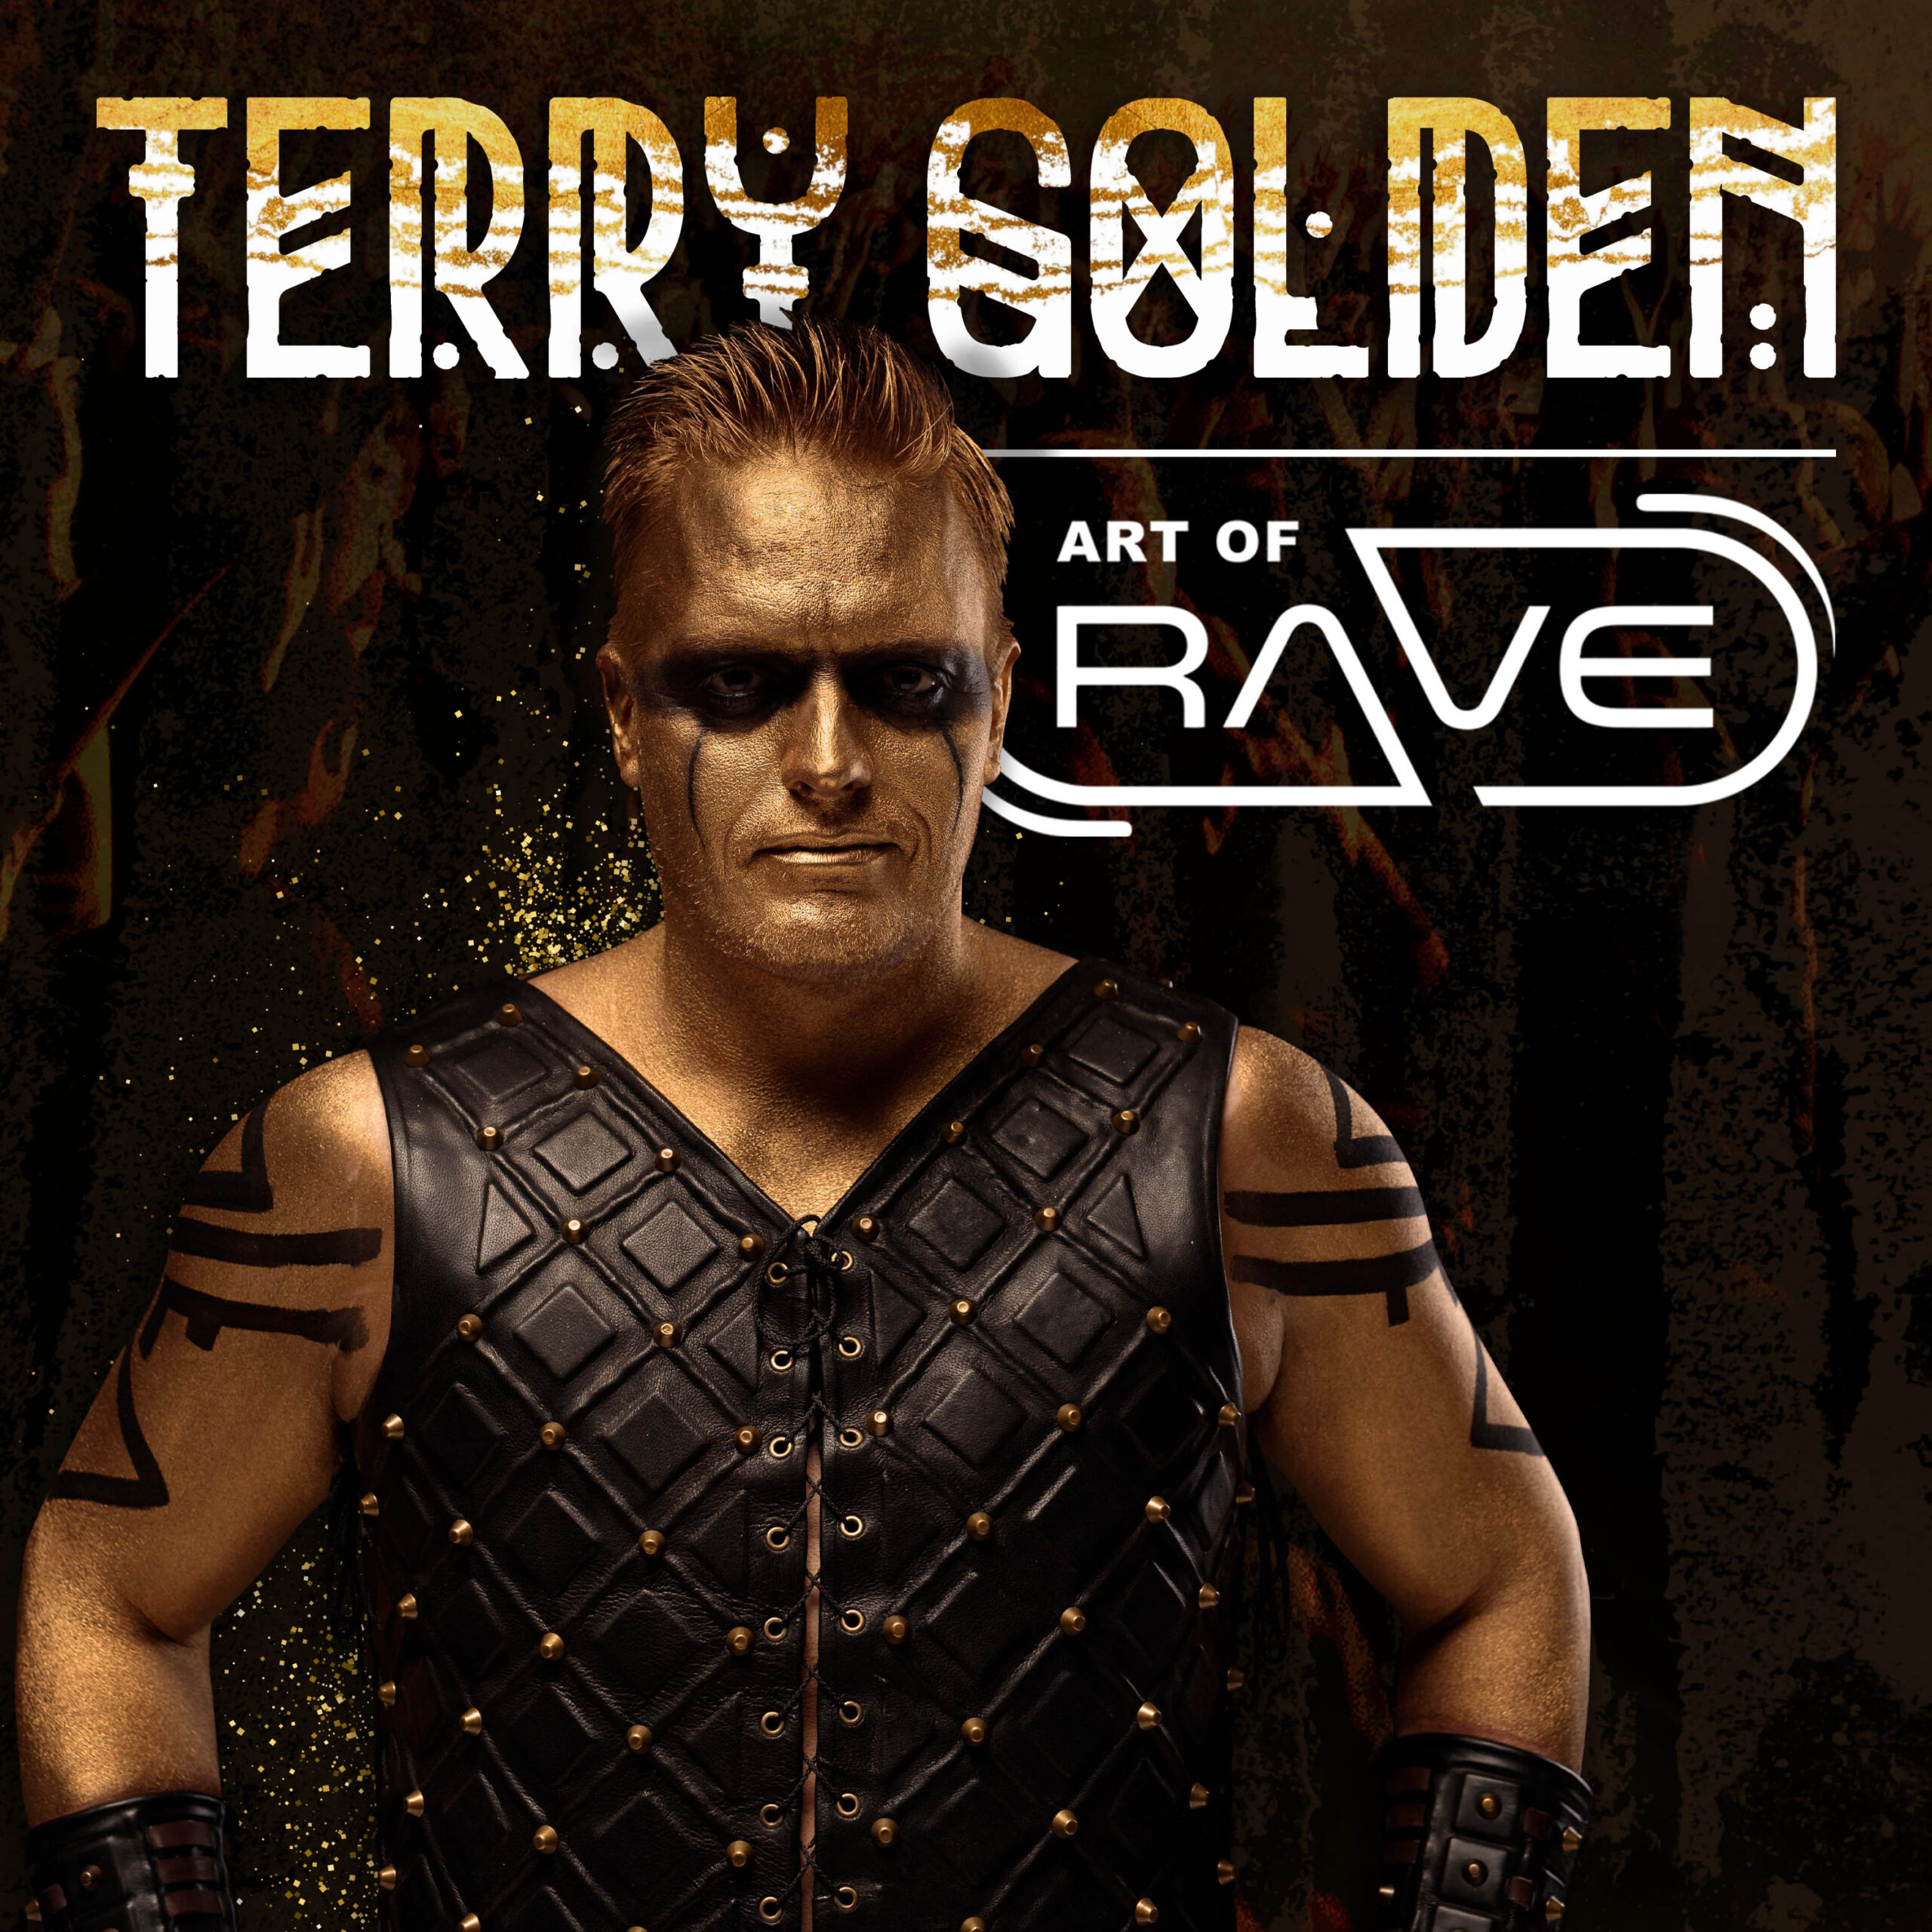 Terry Golden Dropped Electrifying Episodes of His Radio Show “Art of Rave”